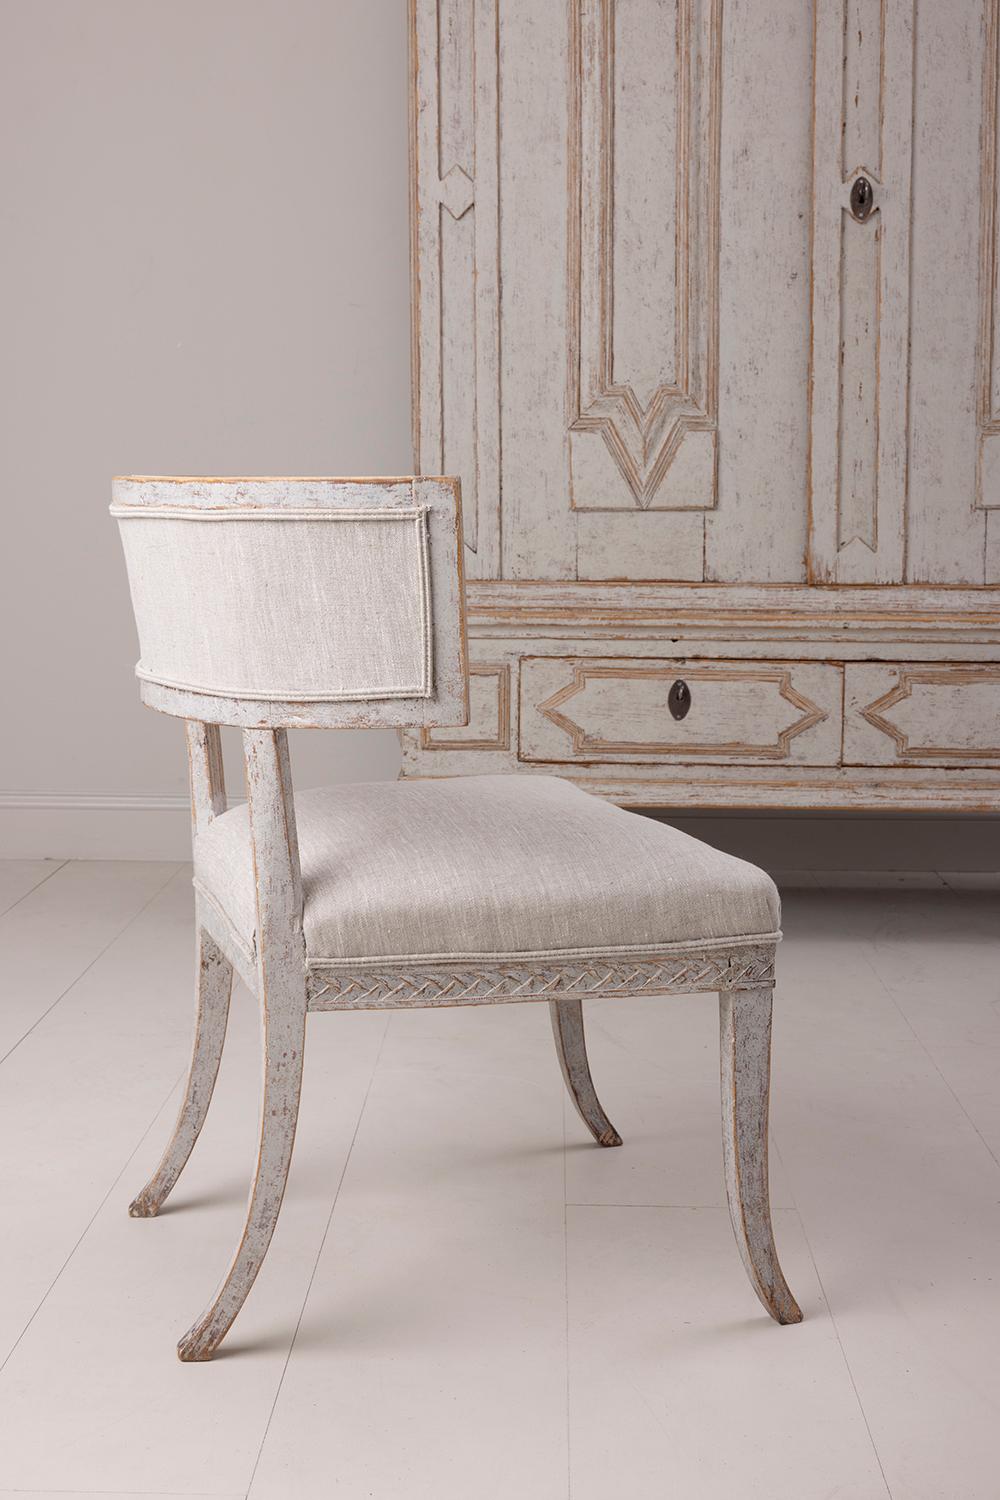 19th C. Swedish Gustavian Period Upholstered and Painted Klismos Chair For Sale 3